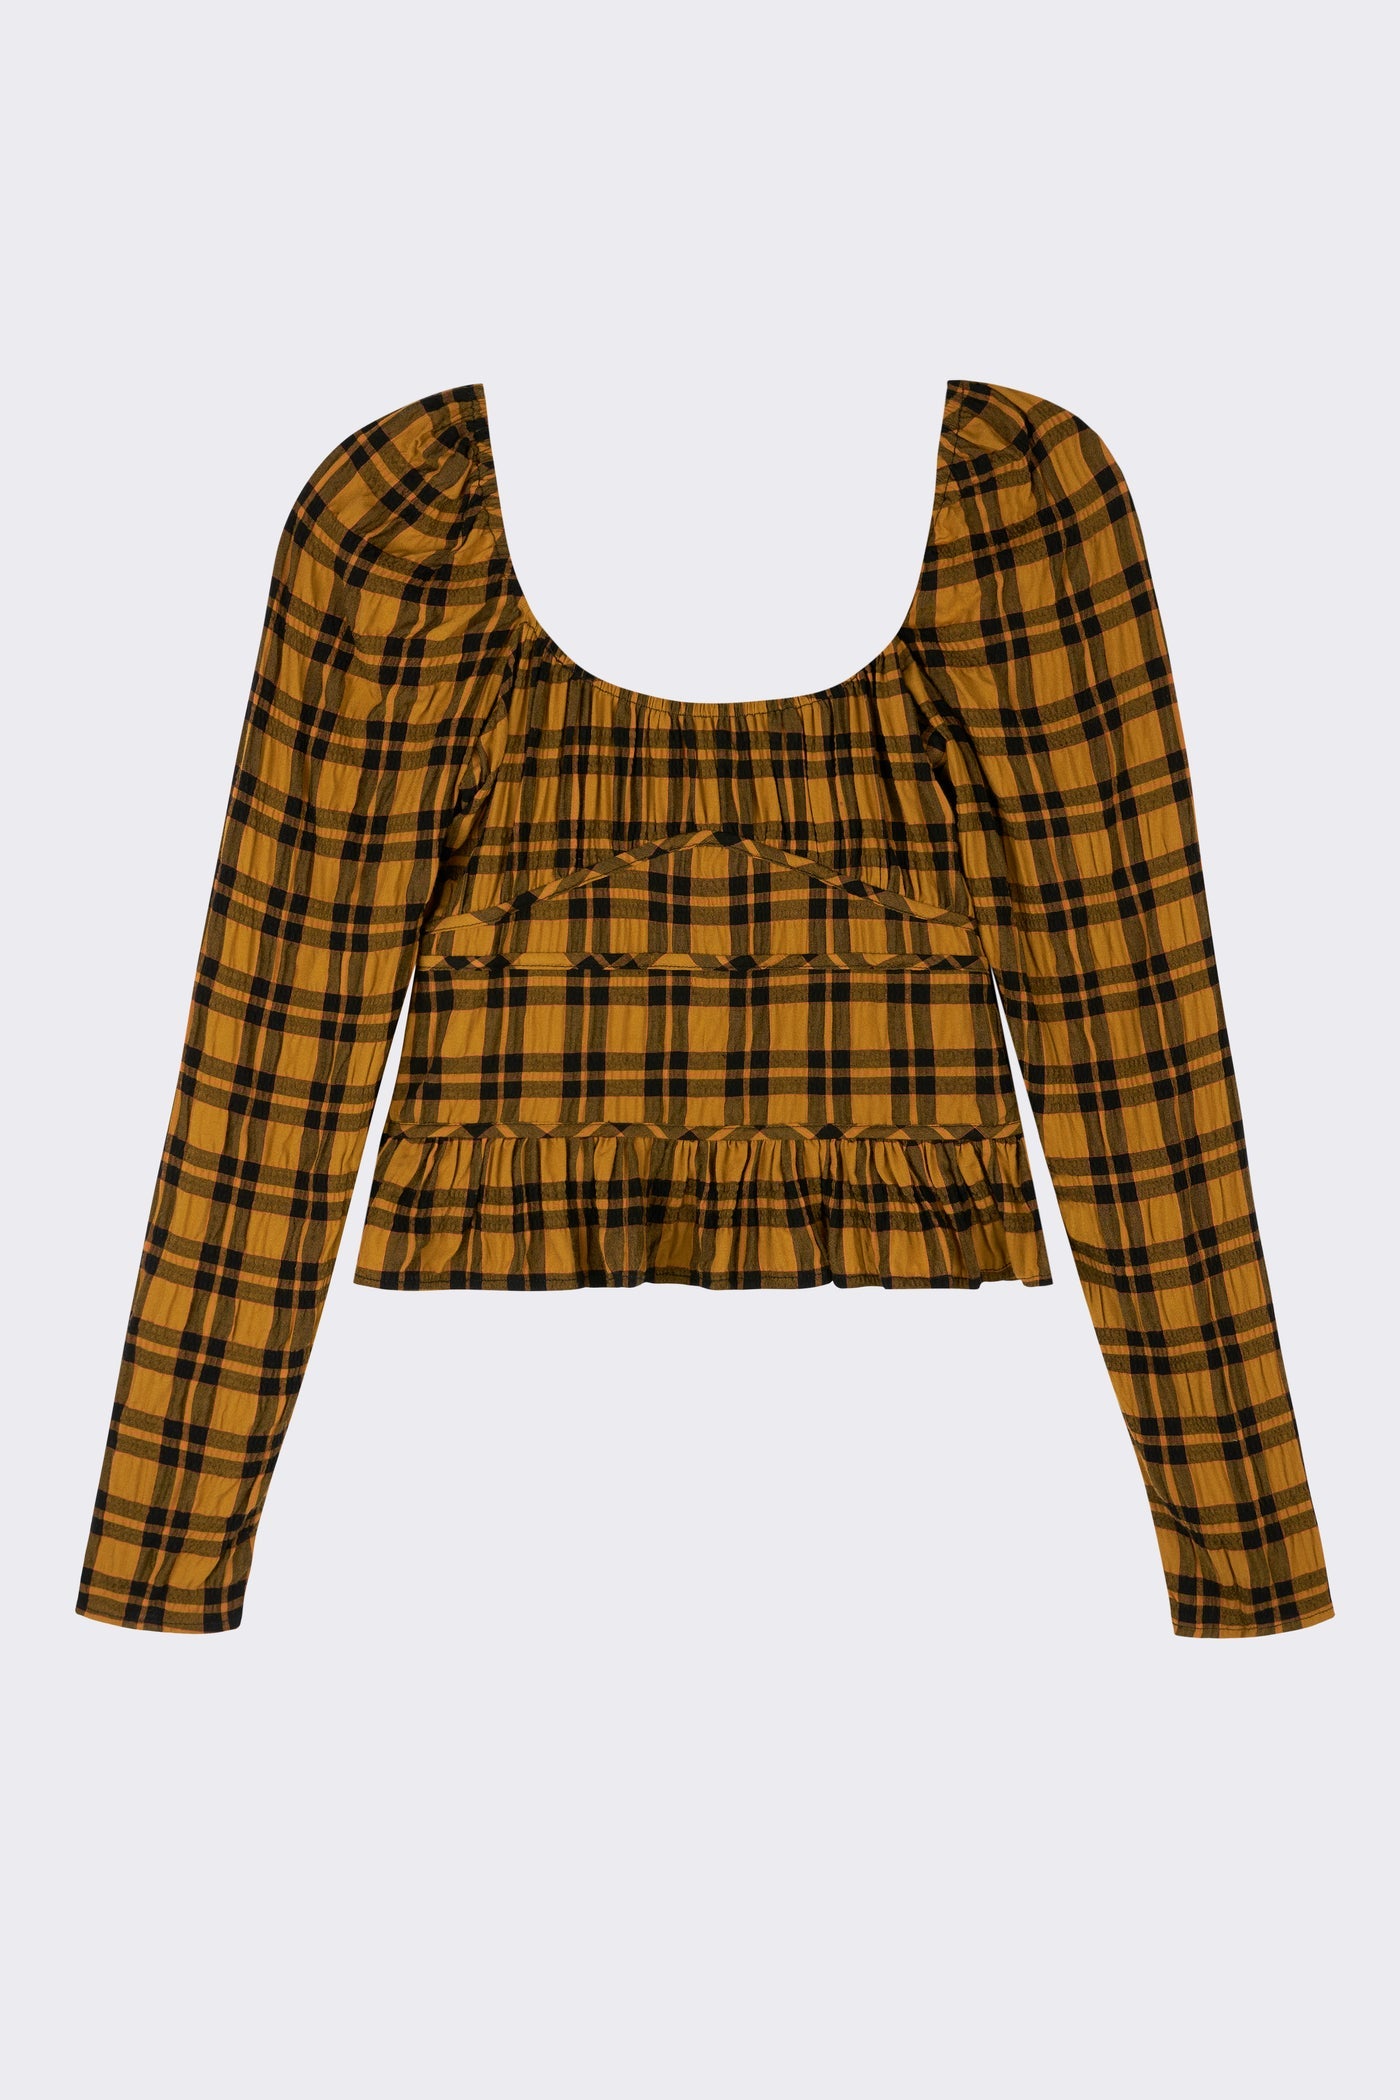 Carter Rib Knit Pant- All Sizes-(Salt & Pepper), Paris Rib Knit Cardigan- All Sizes-(Salt & Pepper), Salma Stretch Bodice Top - ALL SIZES (Gold Plaid), Funnel Topp-All Sizes-(Cinnamon), Funnel Top- All Sizes-(Jade)